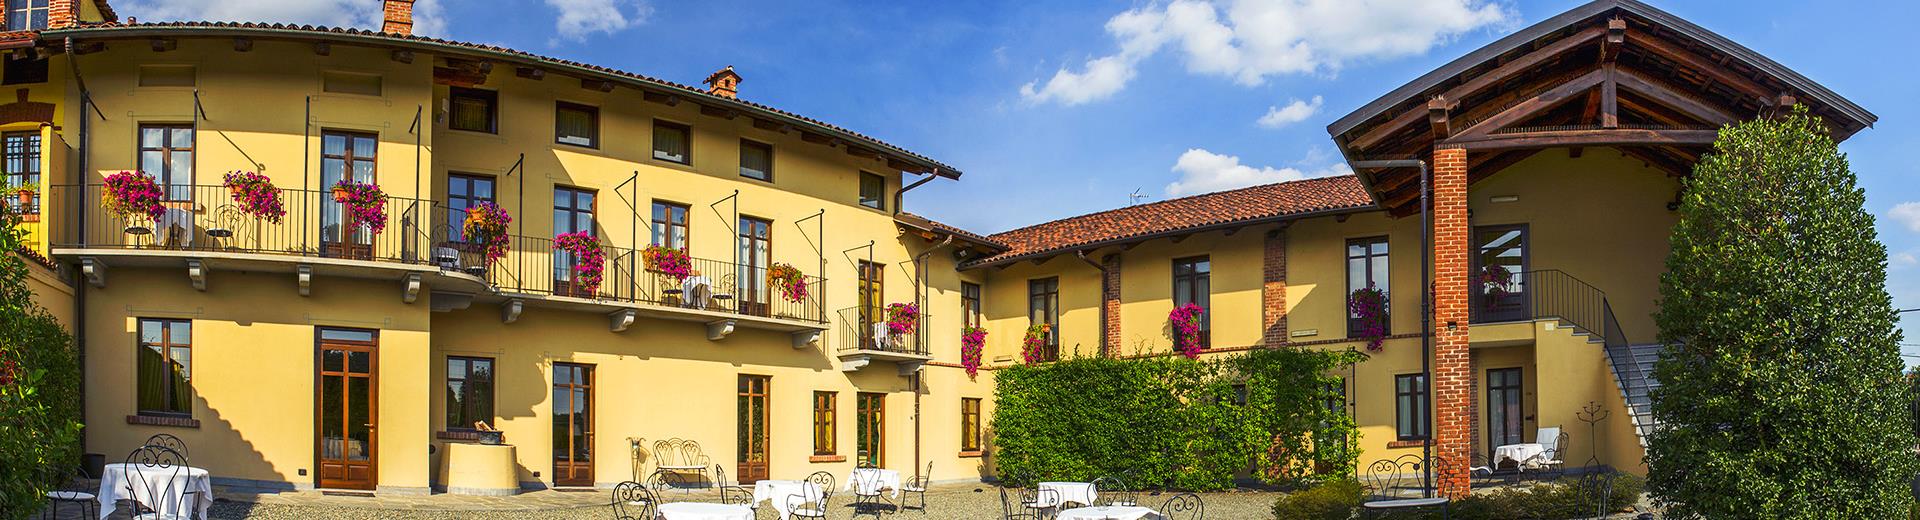 The Best Western Plus Hotel Le Rondini offers you the ideal solution for your stay. A few minutes from Caselle airport and a short distance from the center of Turin and the Allianz Stadium Juventus.